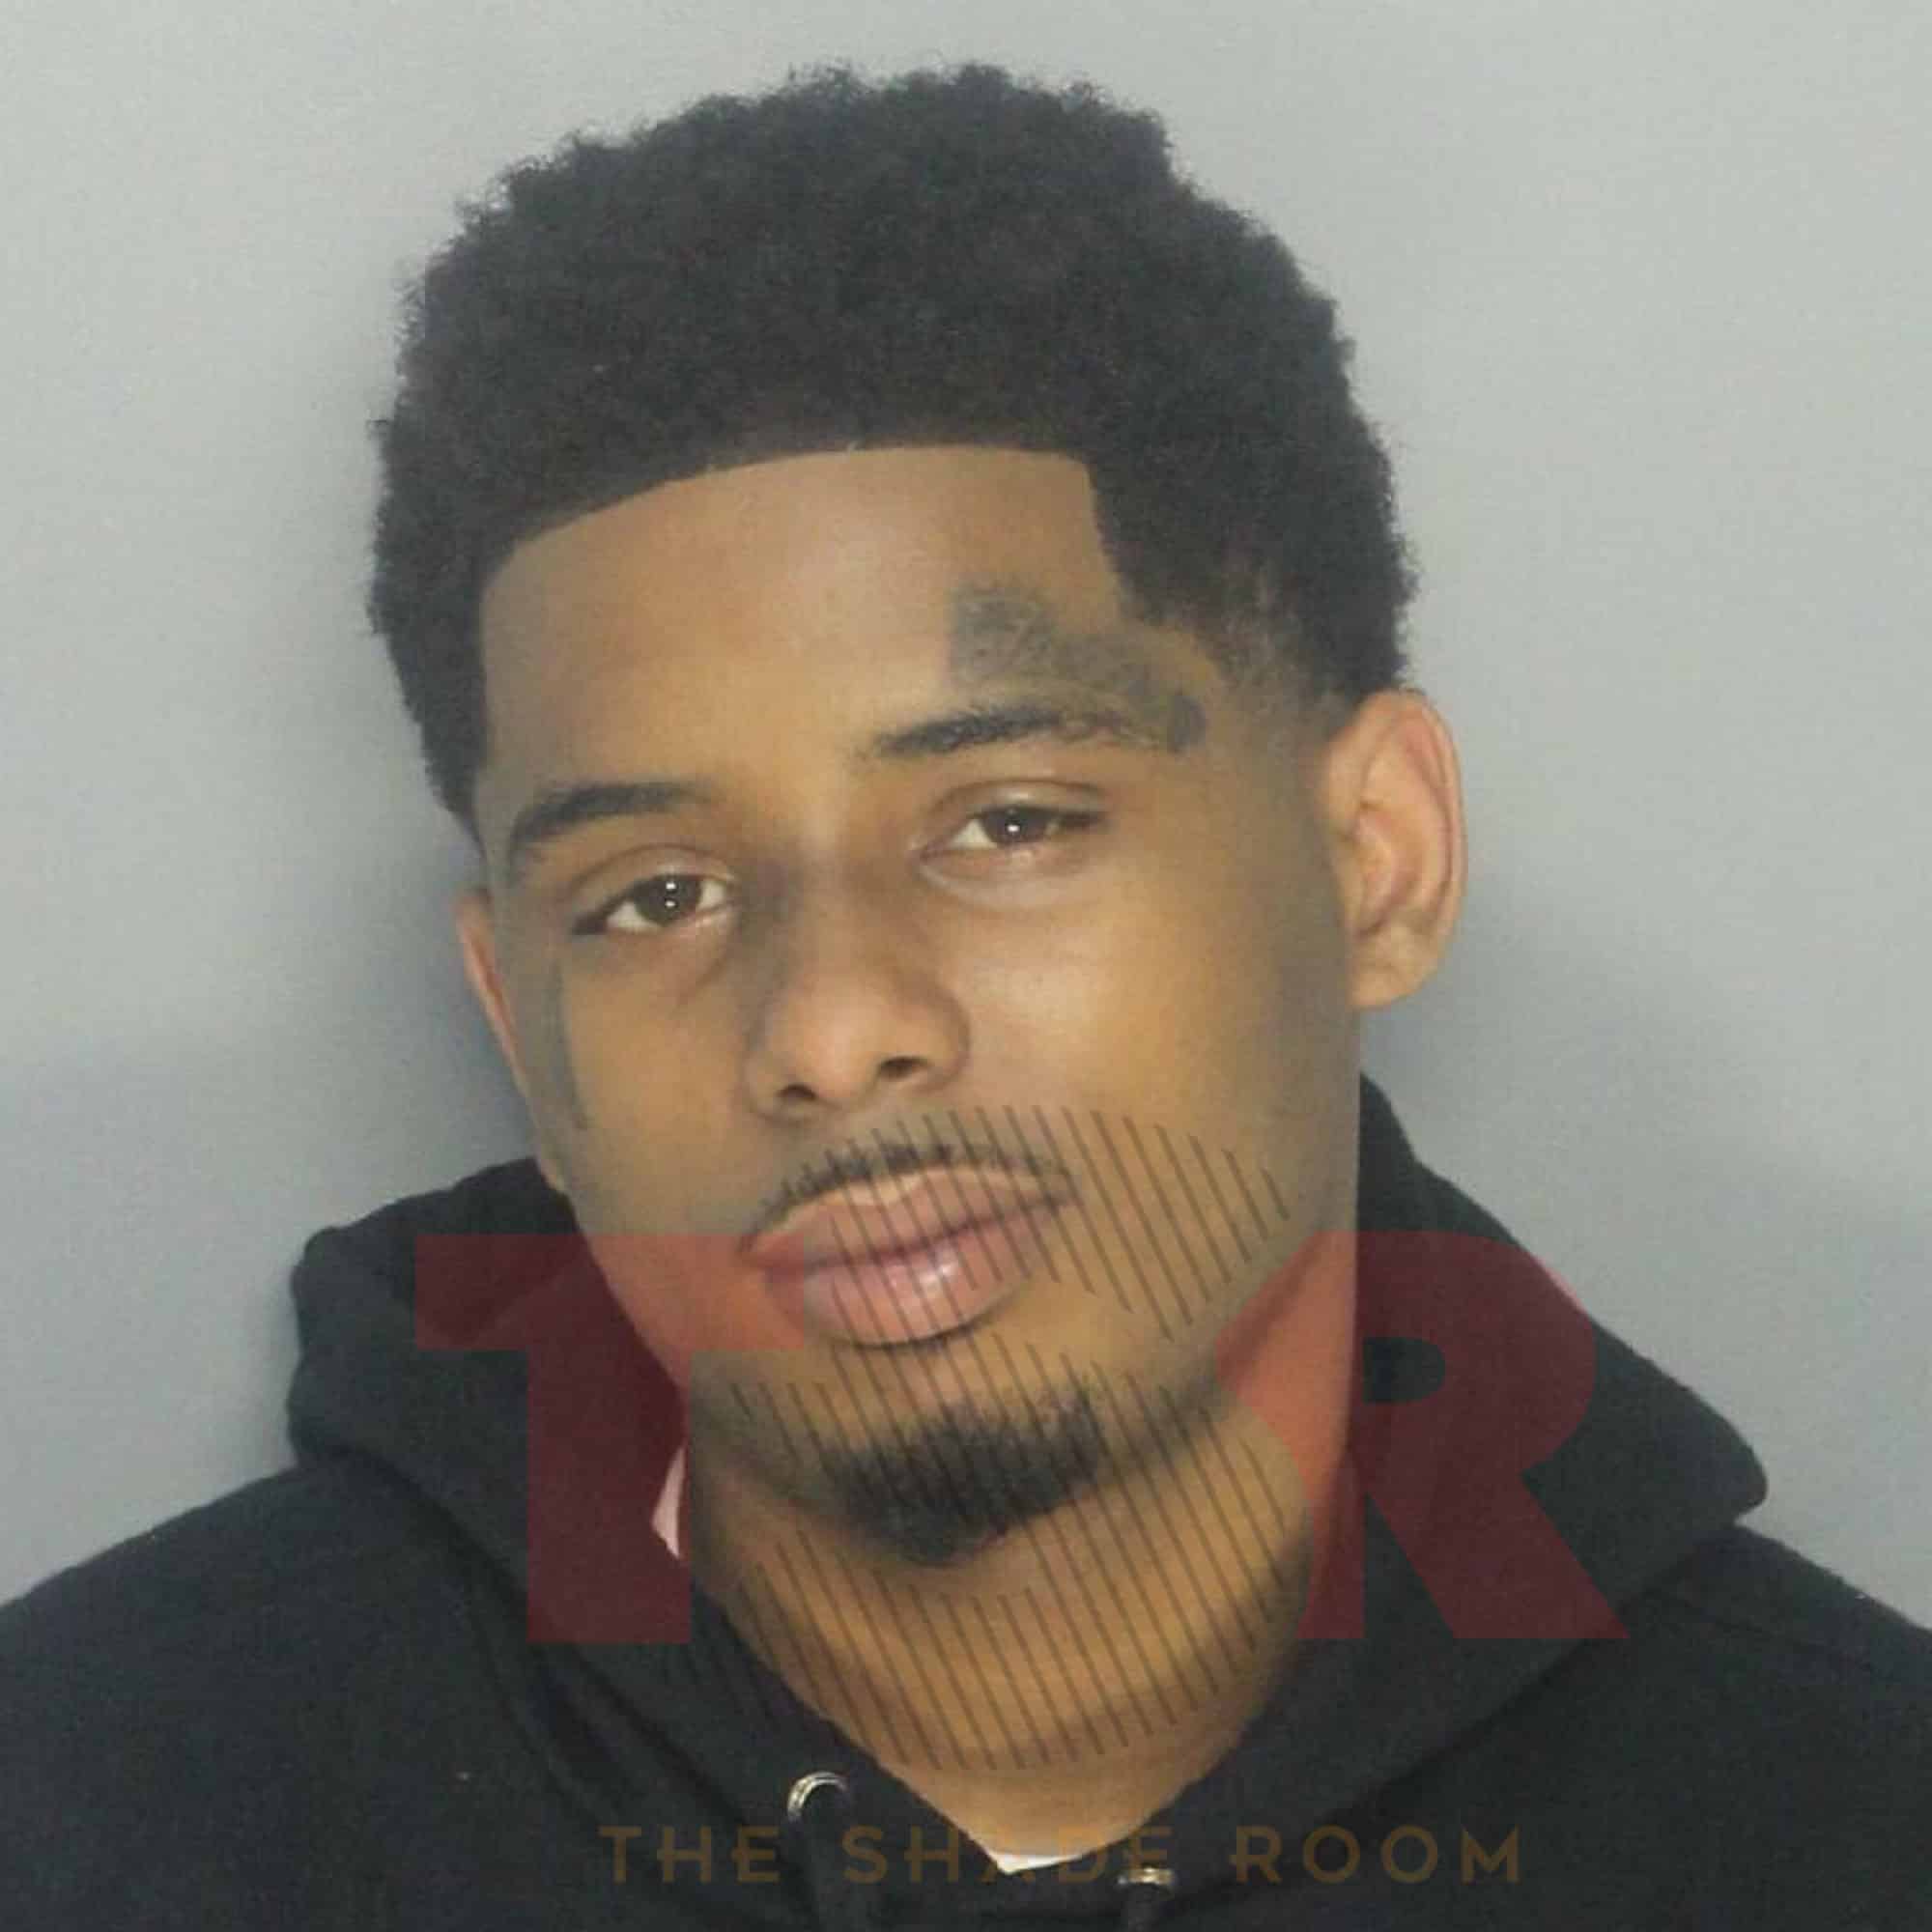 Pooh Shiesty has voluntarily surrendered to authorities after allegedly shooting a strip club security guard in the leg during a recent Miami appearance. He's being held without bond.